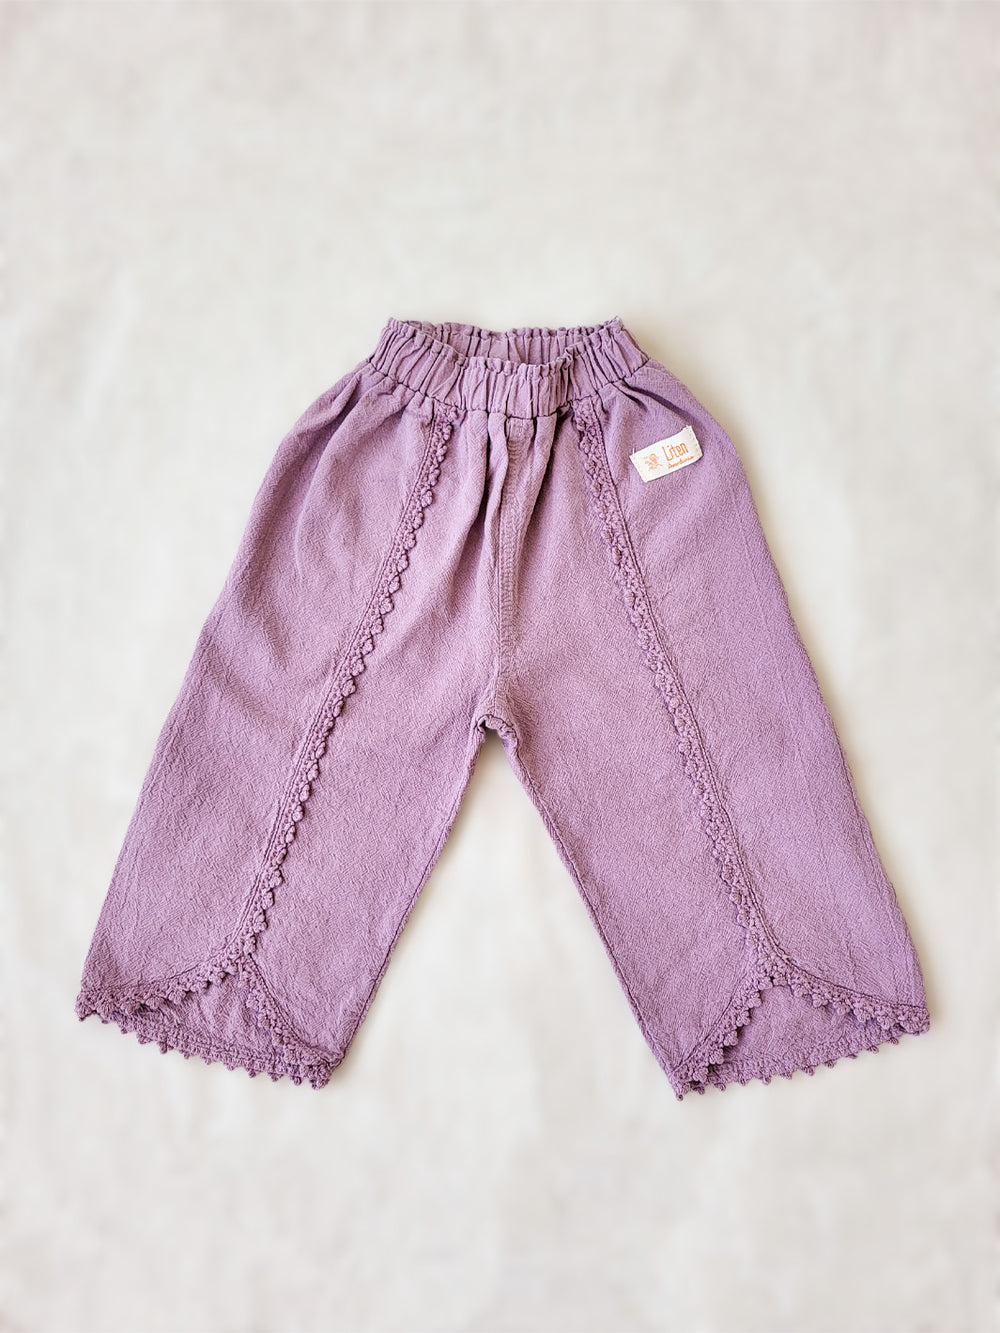 Liten Aventuris Natural Tocuyo Cotton pants for kids. Our Lorin pants are perfect for sunny days. With its loose-fitting size and soft elastic on the waist, toddlers and kids will feel comfortable and free. The Lorin pants bring an embroidered cotton decorative ribbon that will be the perfect match to our Lorin T-shirt! Perfect for girls. Barnkläder, Bomullskläder, Natural kläder. Flicka kläder. Barn Byxor.